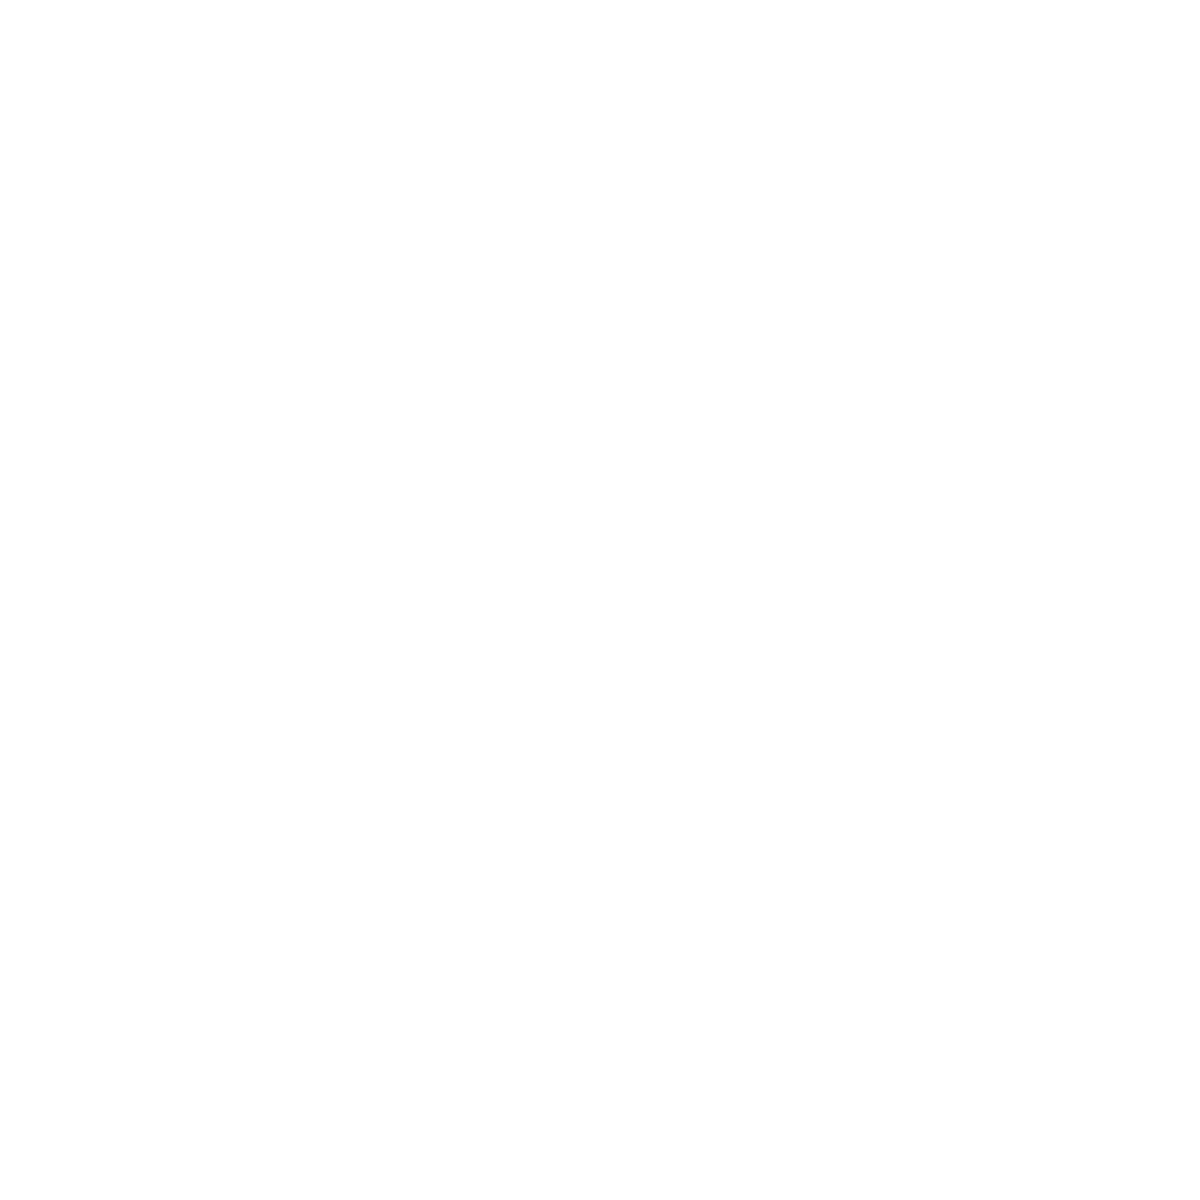 An icon of the ASL sign for respect